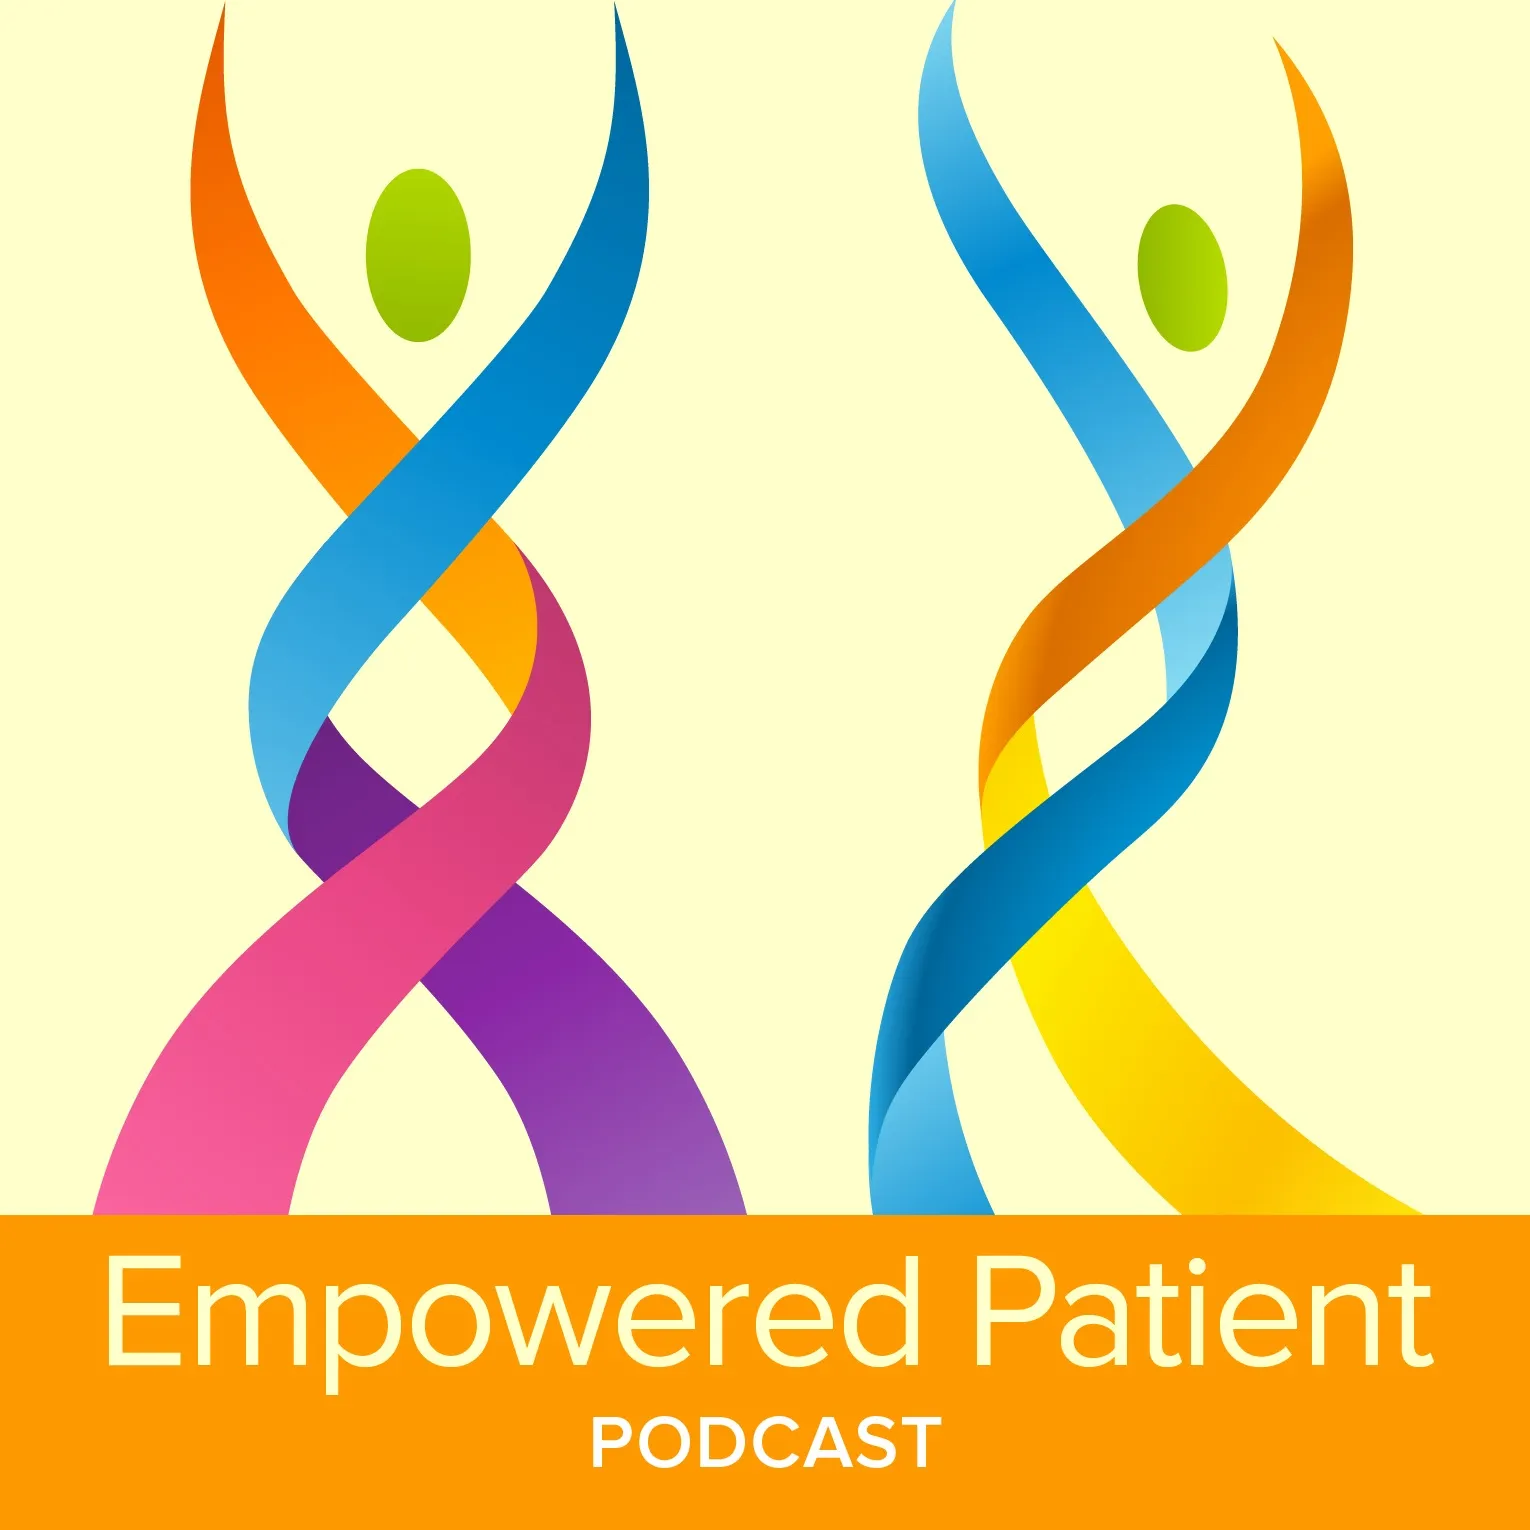 Empowered Patient Podcast: Digital Mental Health Apps Advantages and Opportunities with Dr. Alison Darcy